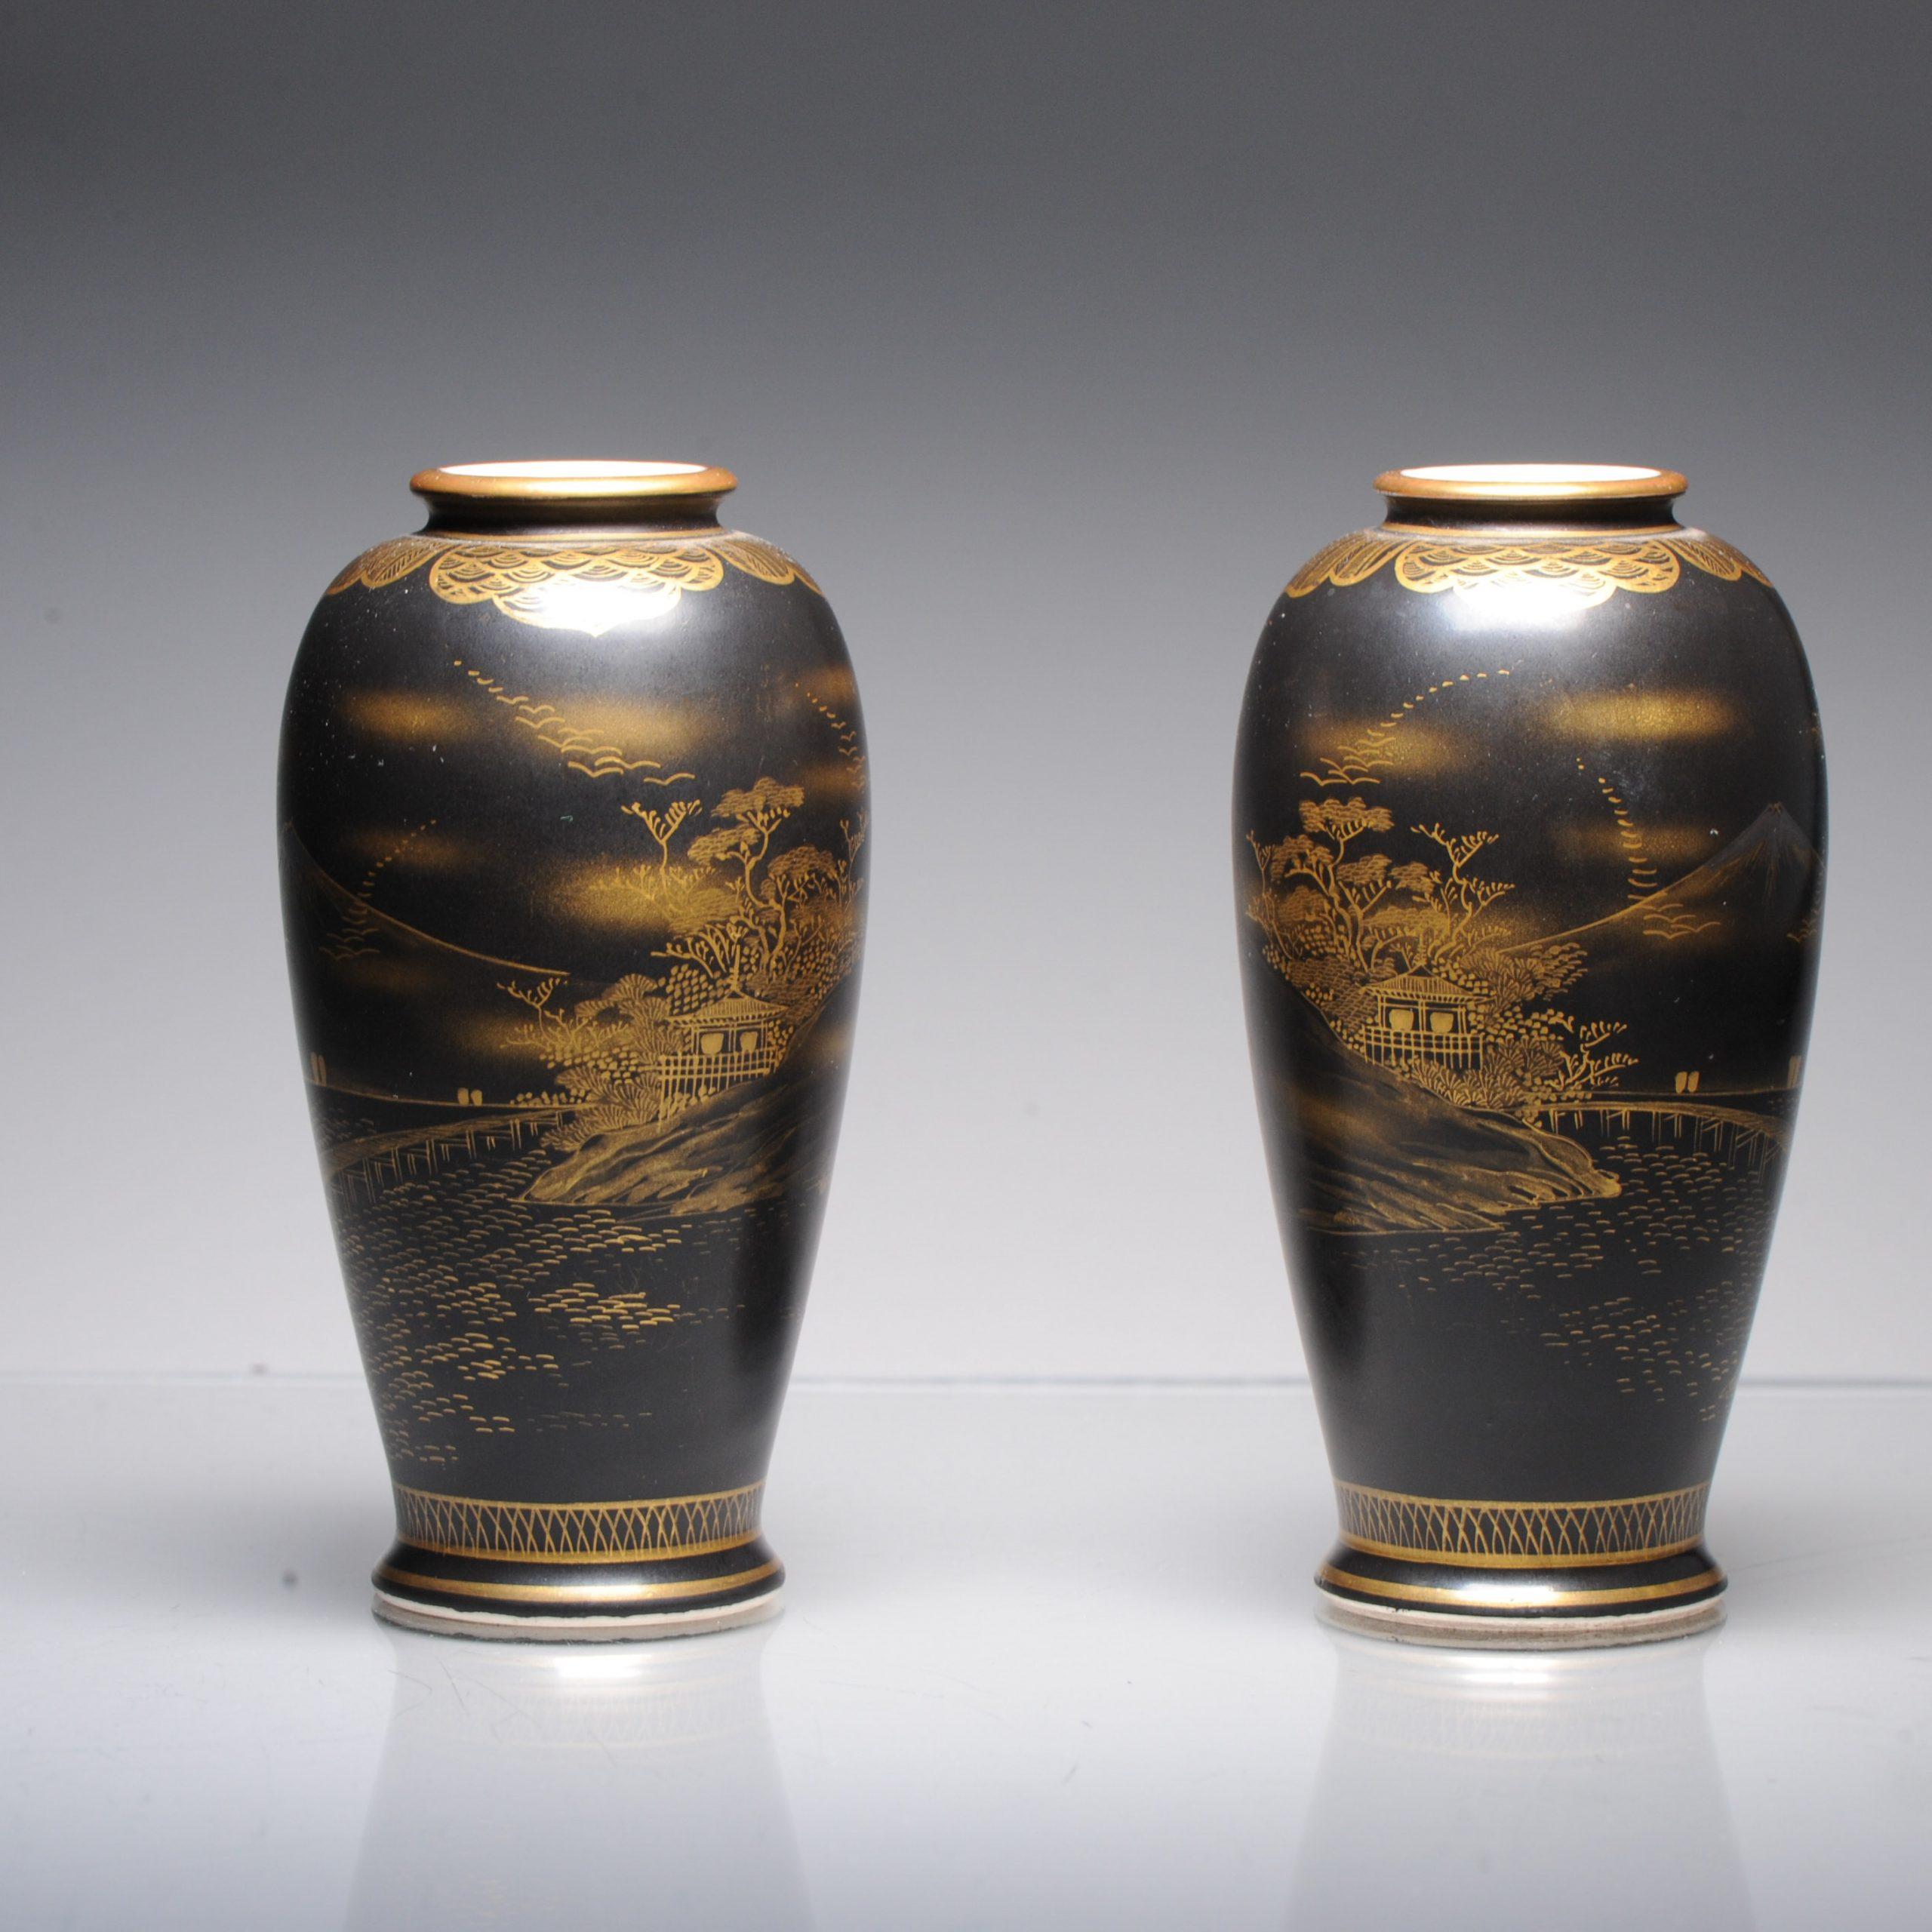 Antique Pair 19C Japanese Satsuma High Quality Black Vases Landscape Uchida In Excellent Condition For Sale In Amsterdam, Noord Holland